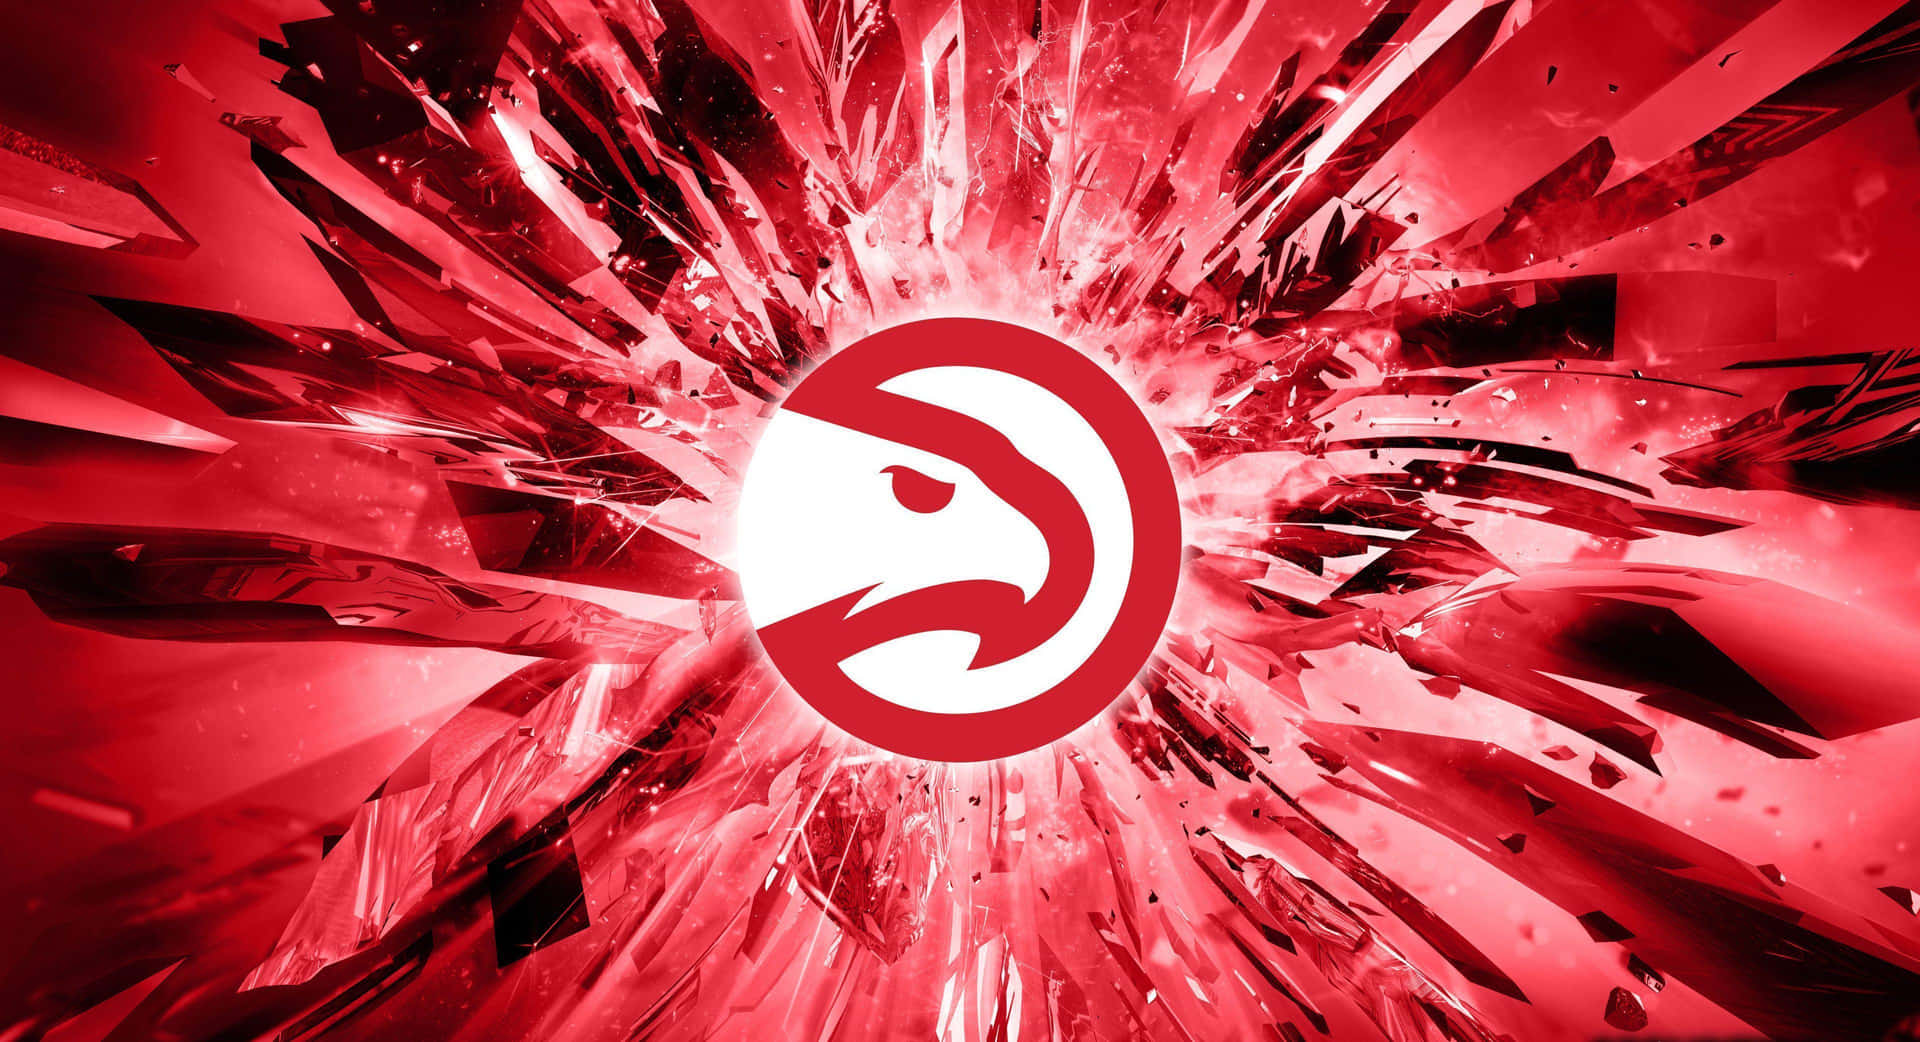 Join the Atlanta Hawks for a Night of Excitement